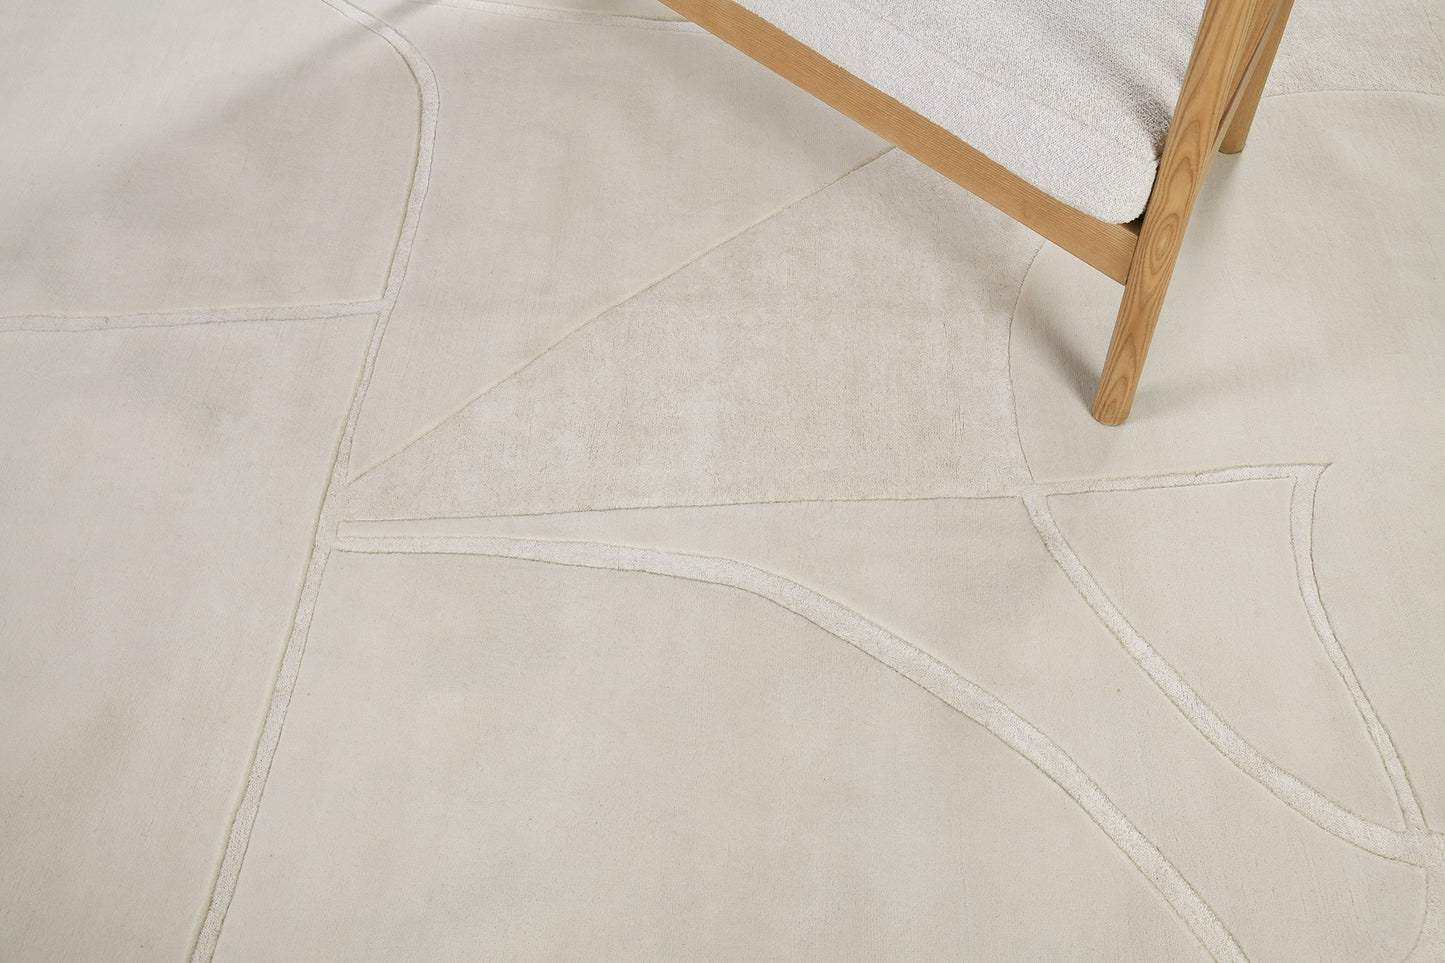 Modern Rug Image 2685 Contour by Claudia Afshar